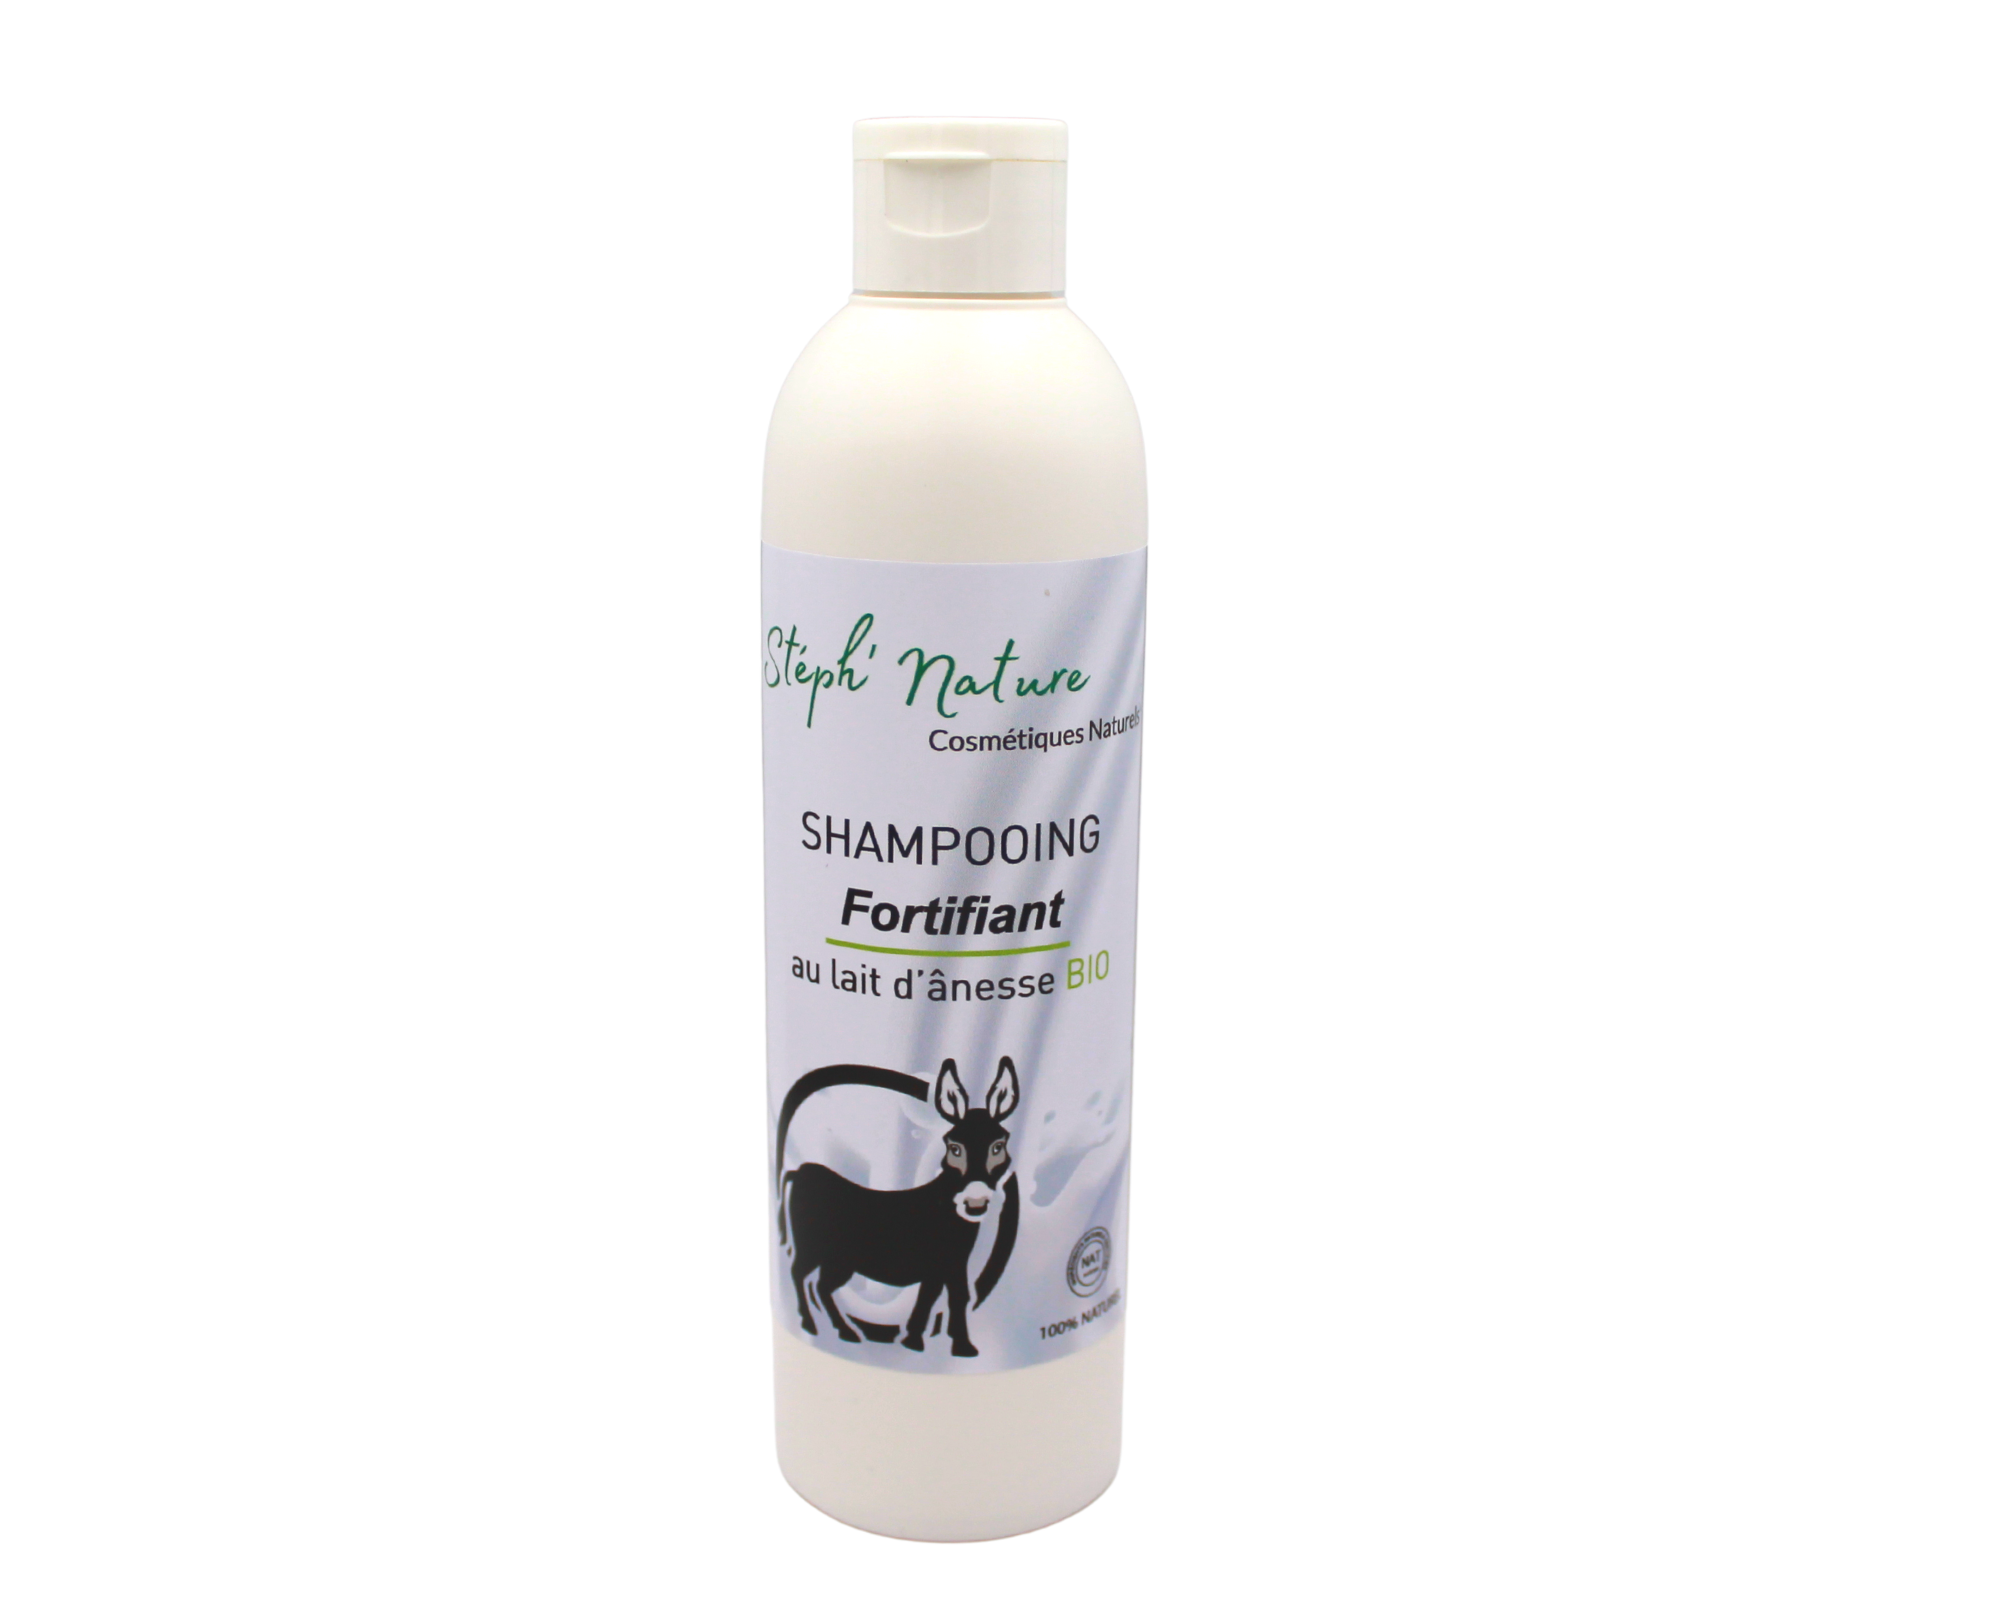 Shampooing fortifiant lait d' ânesse Bio